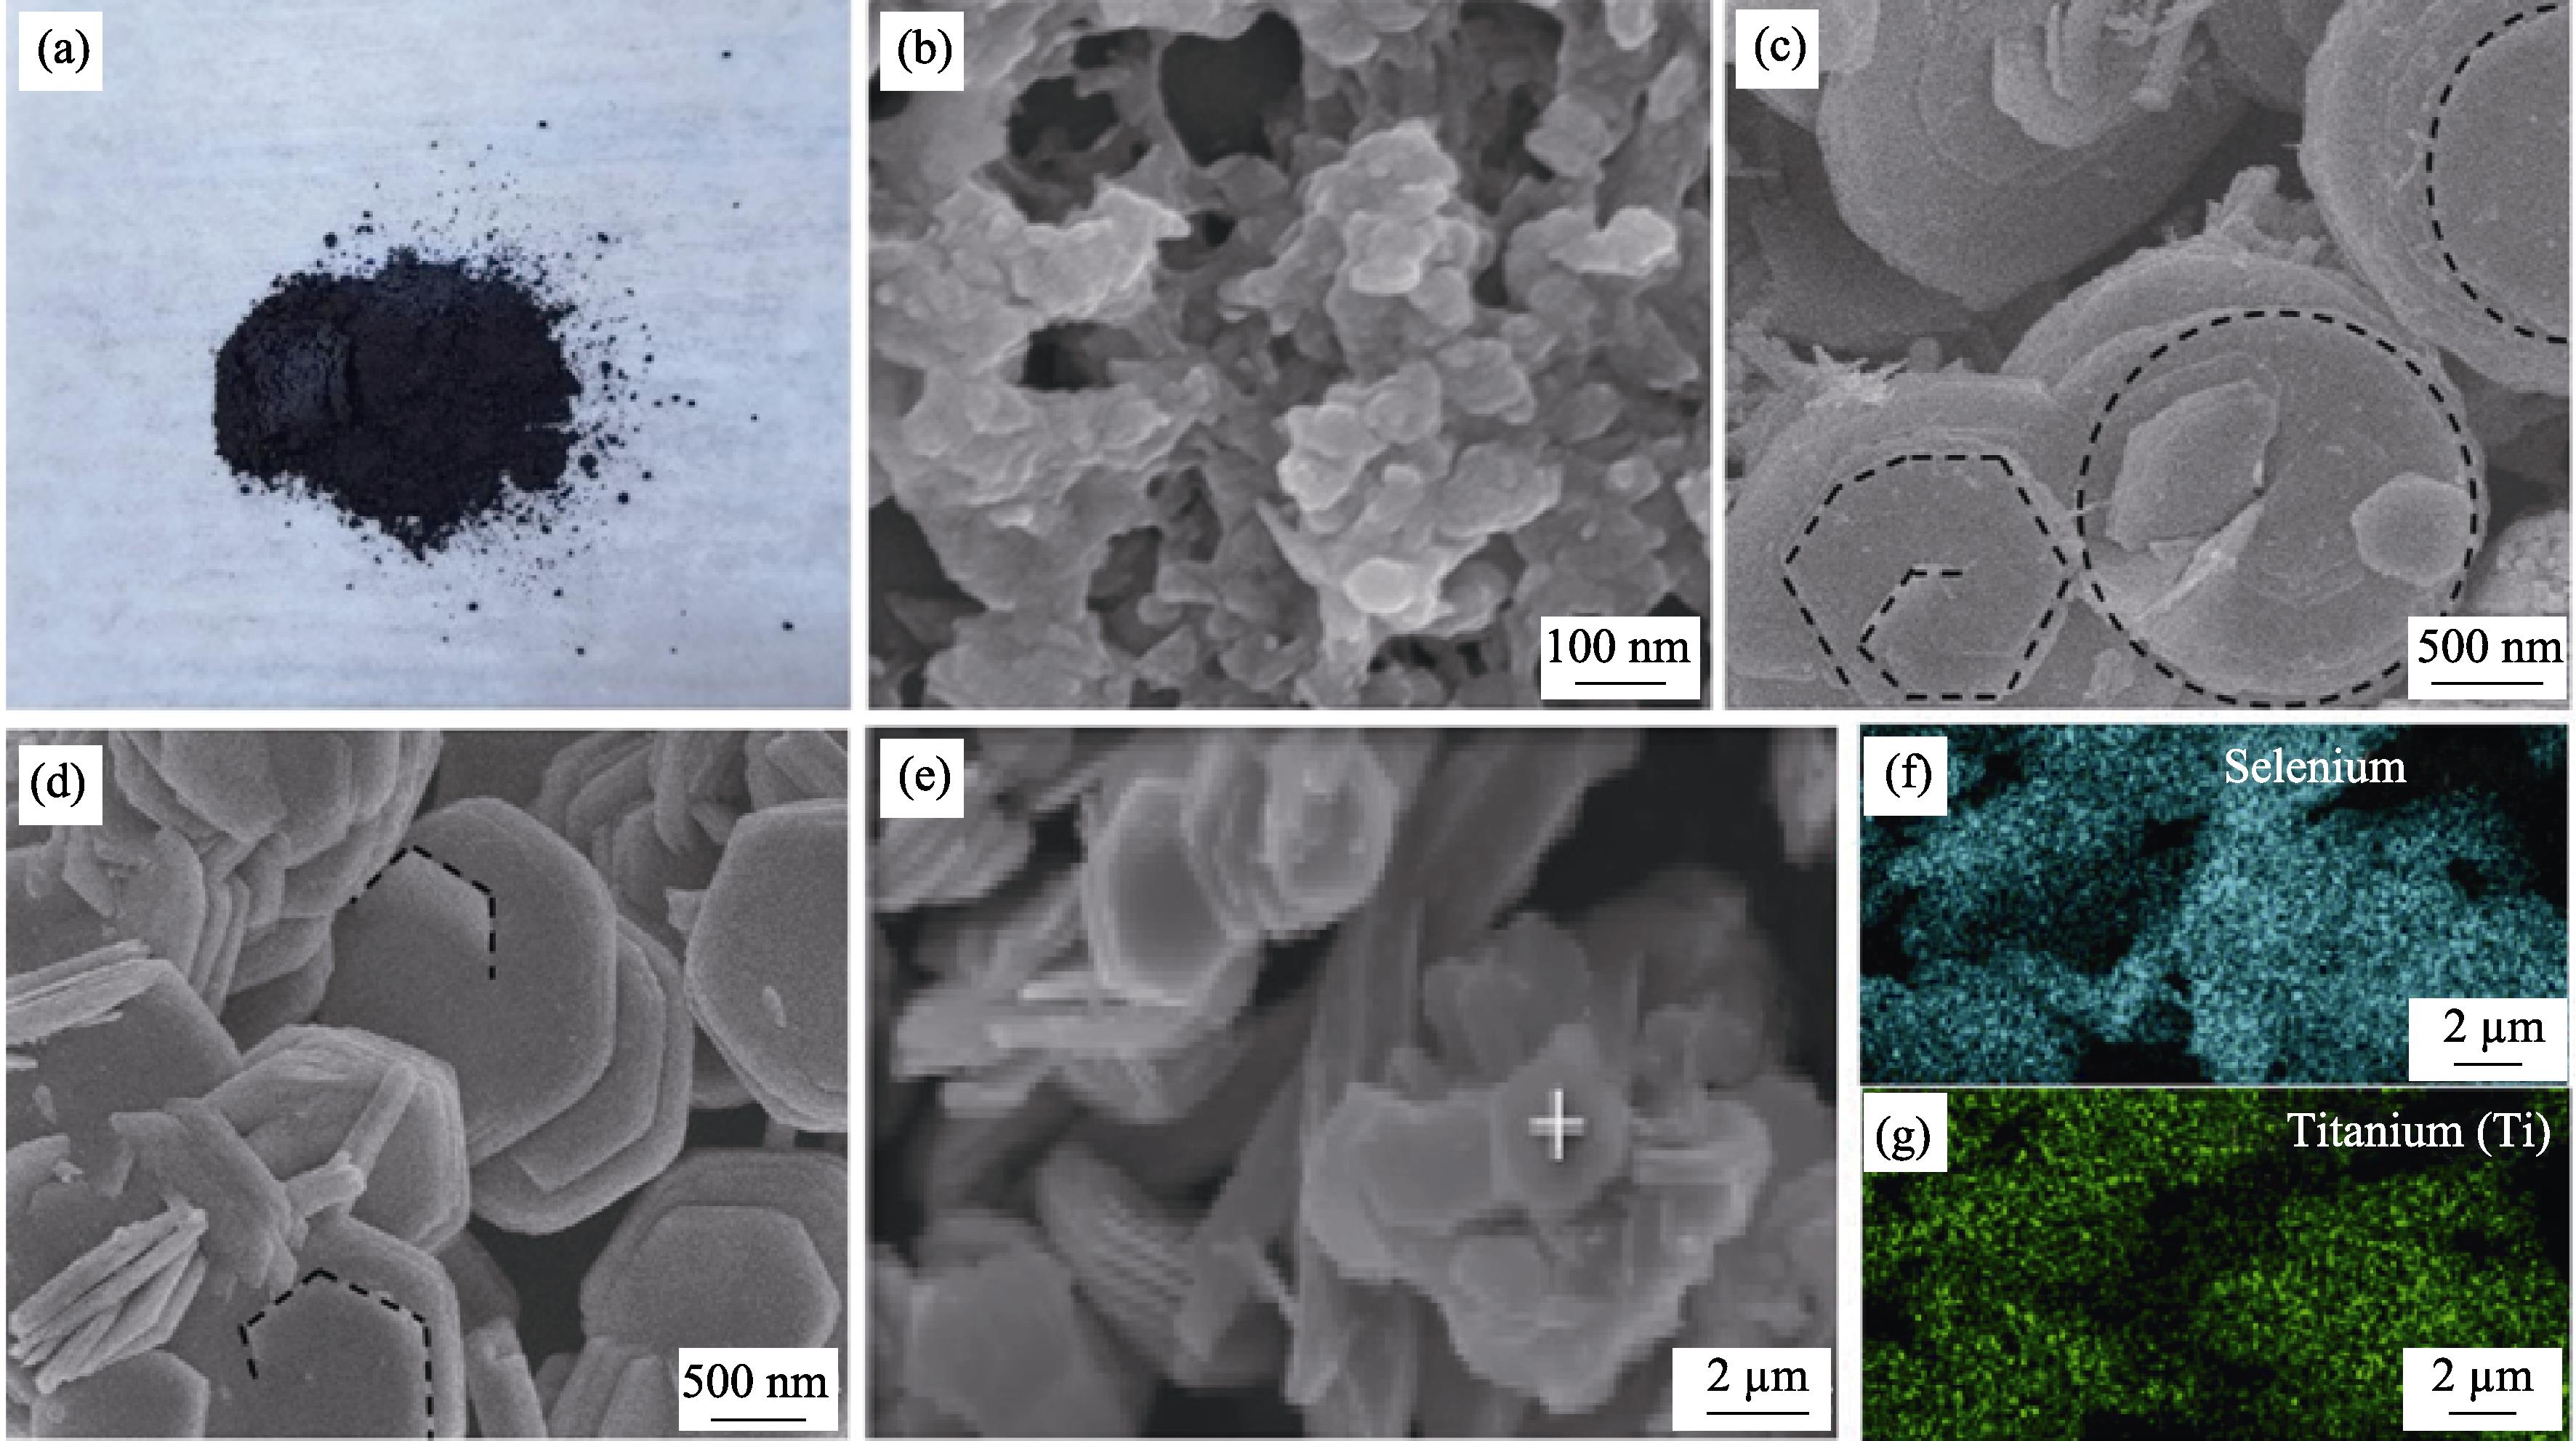 Photograph of TiSe2 powder (a); SEM images of TiSe2-10 min (b), TiSe2-50 min (c), TiSe2-90 min (d) and EDS mapping of TiSe2-90 min (e-g)